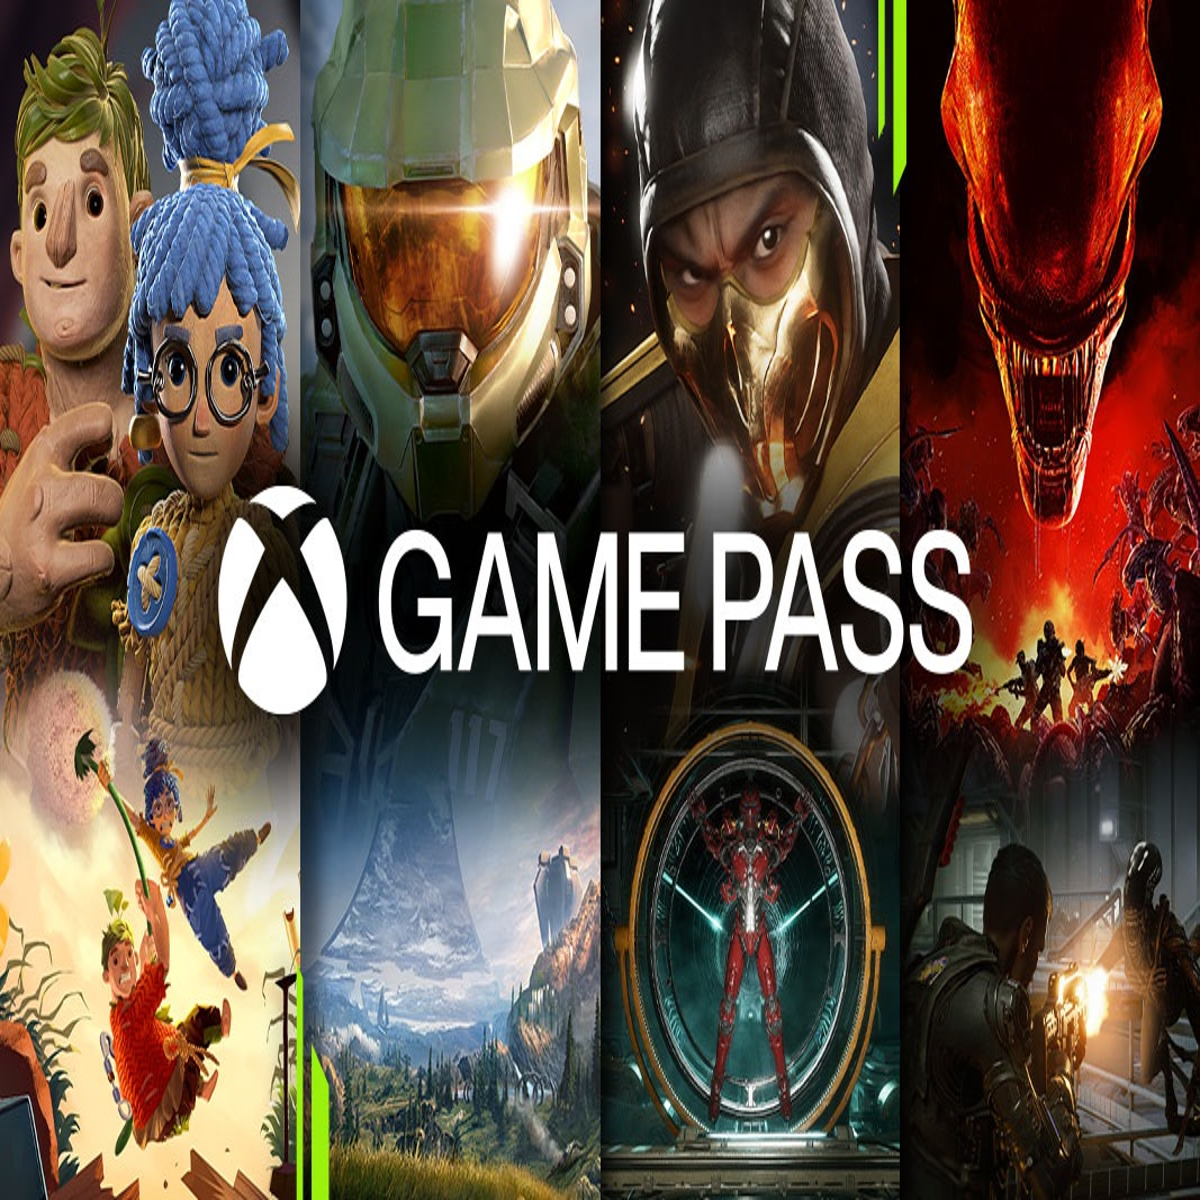 Xbox Game Pass: Microsoft is expanding it - Protocol